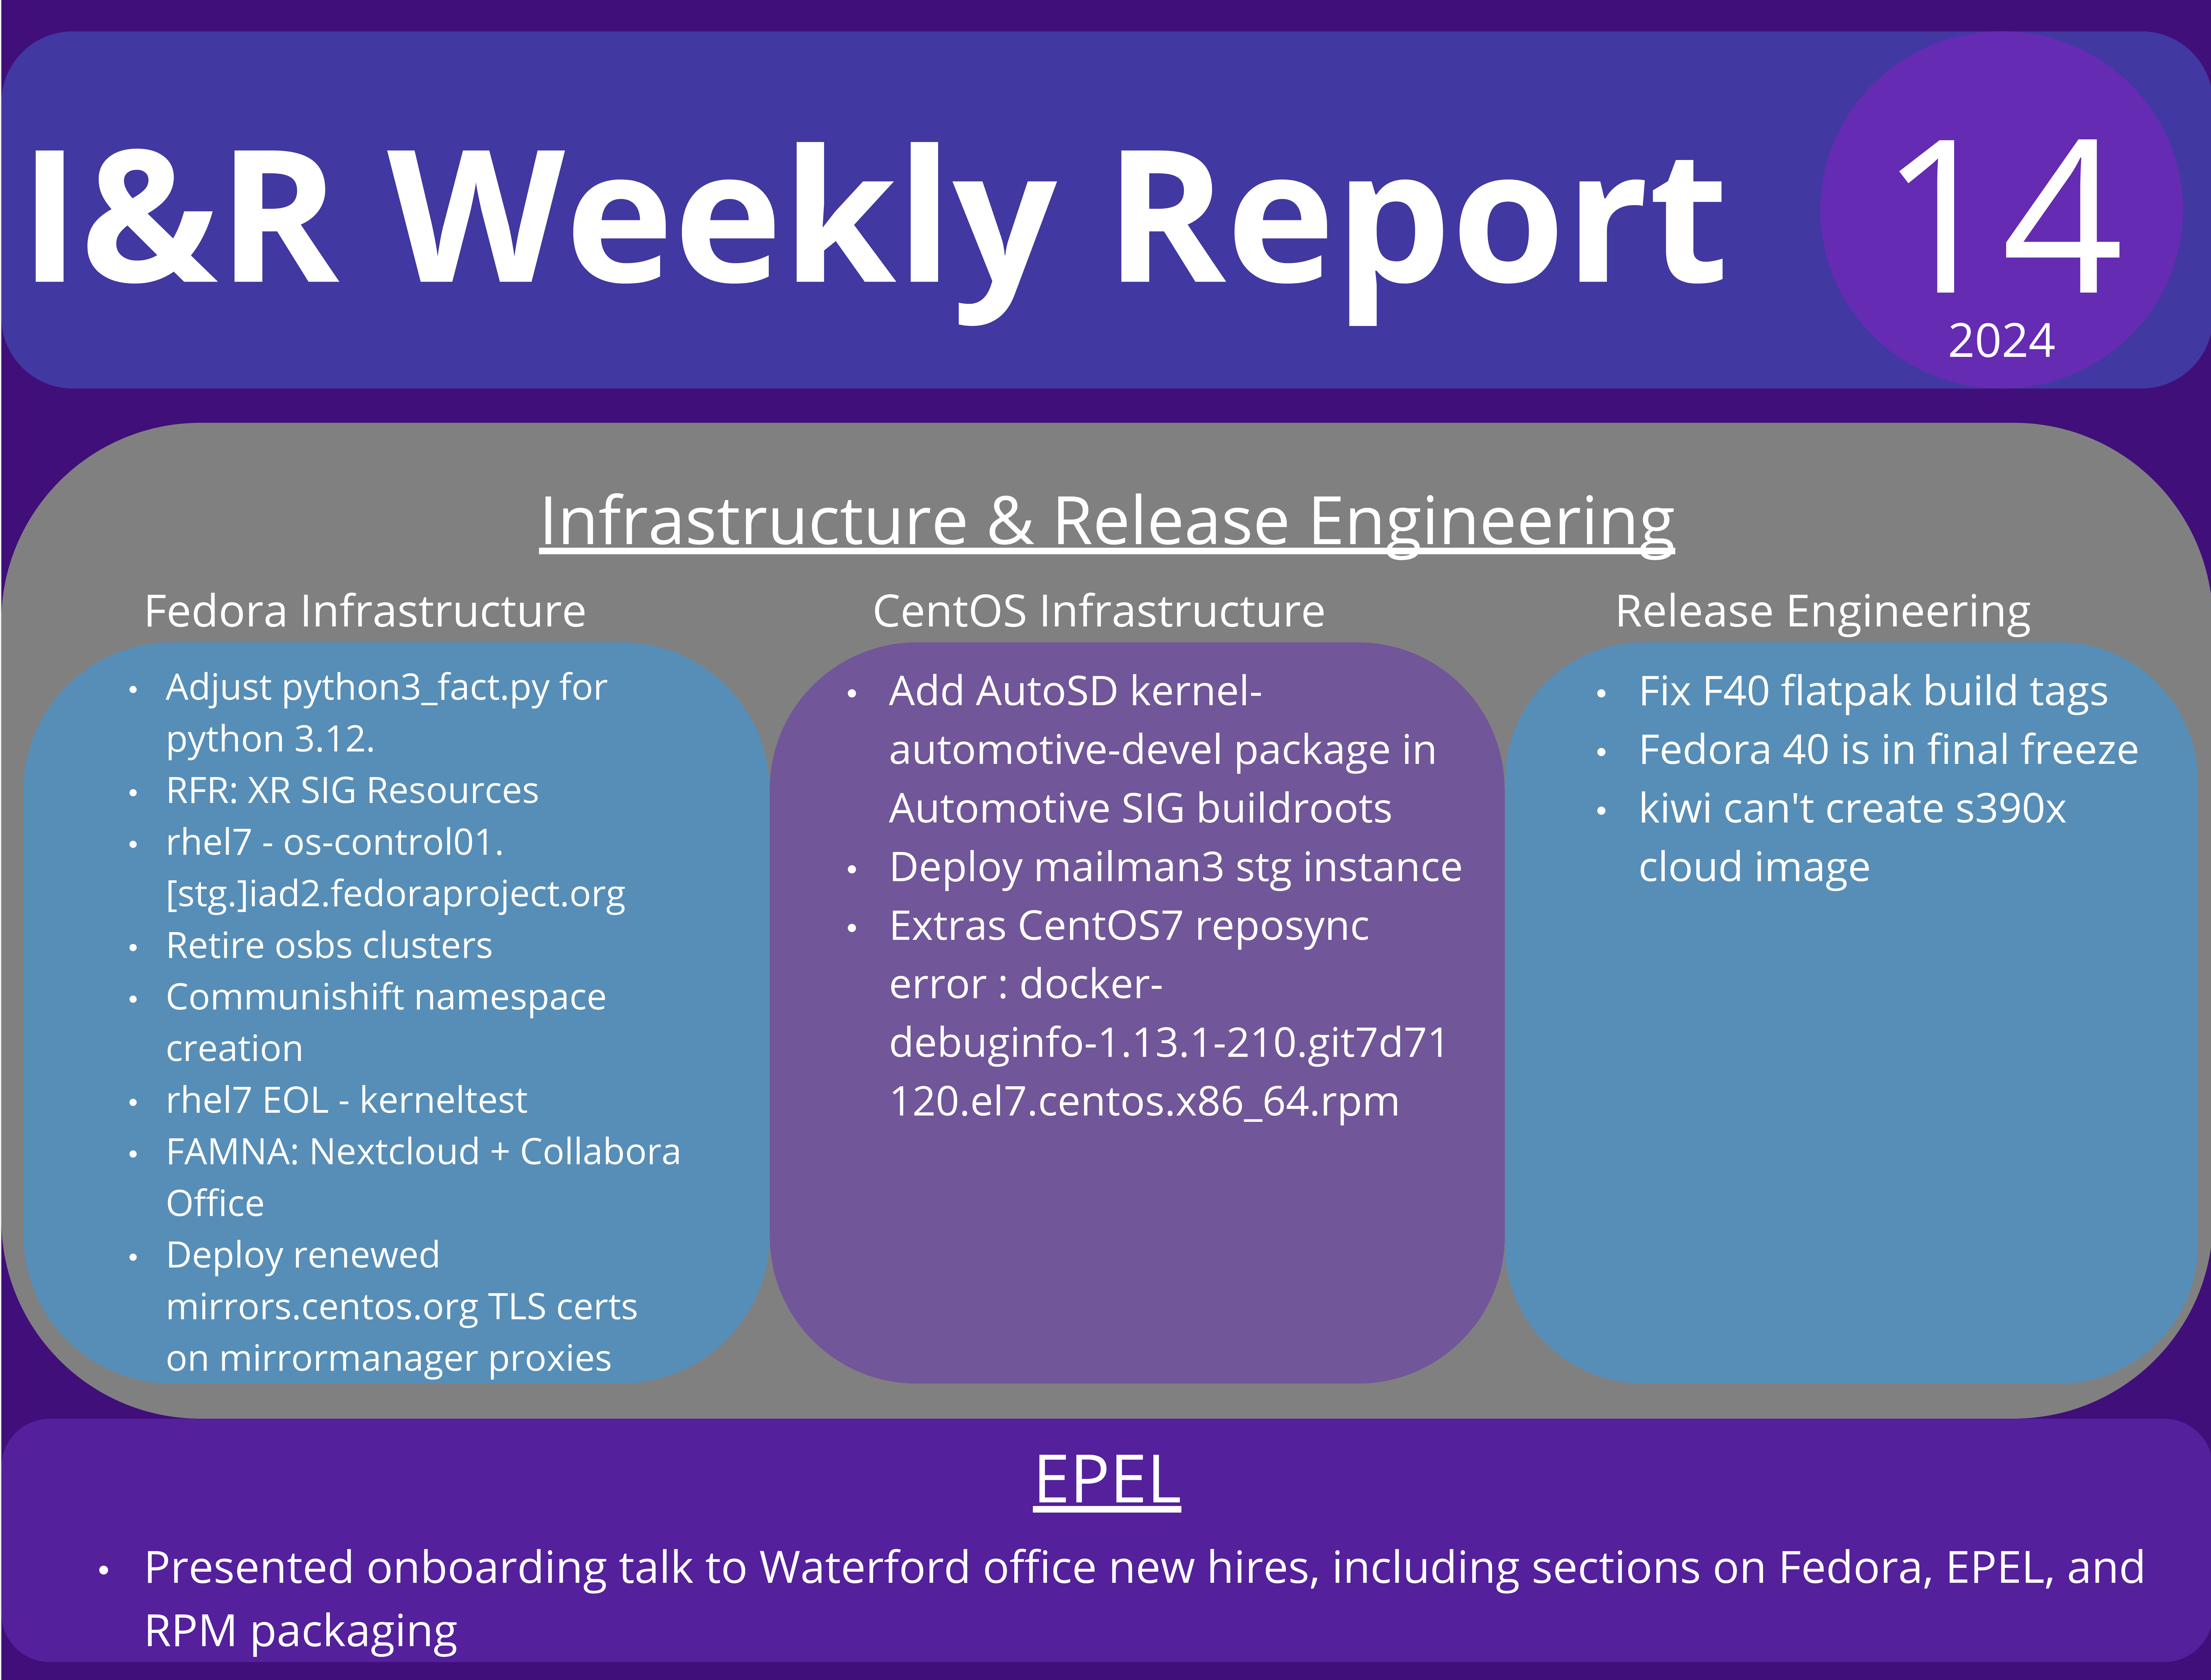 Infra and Releng infographic